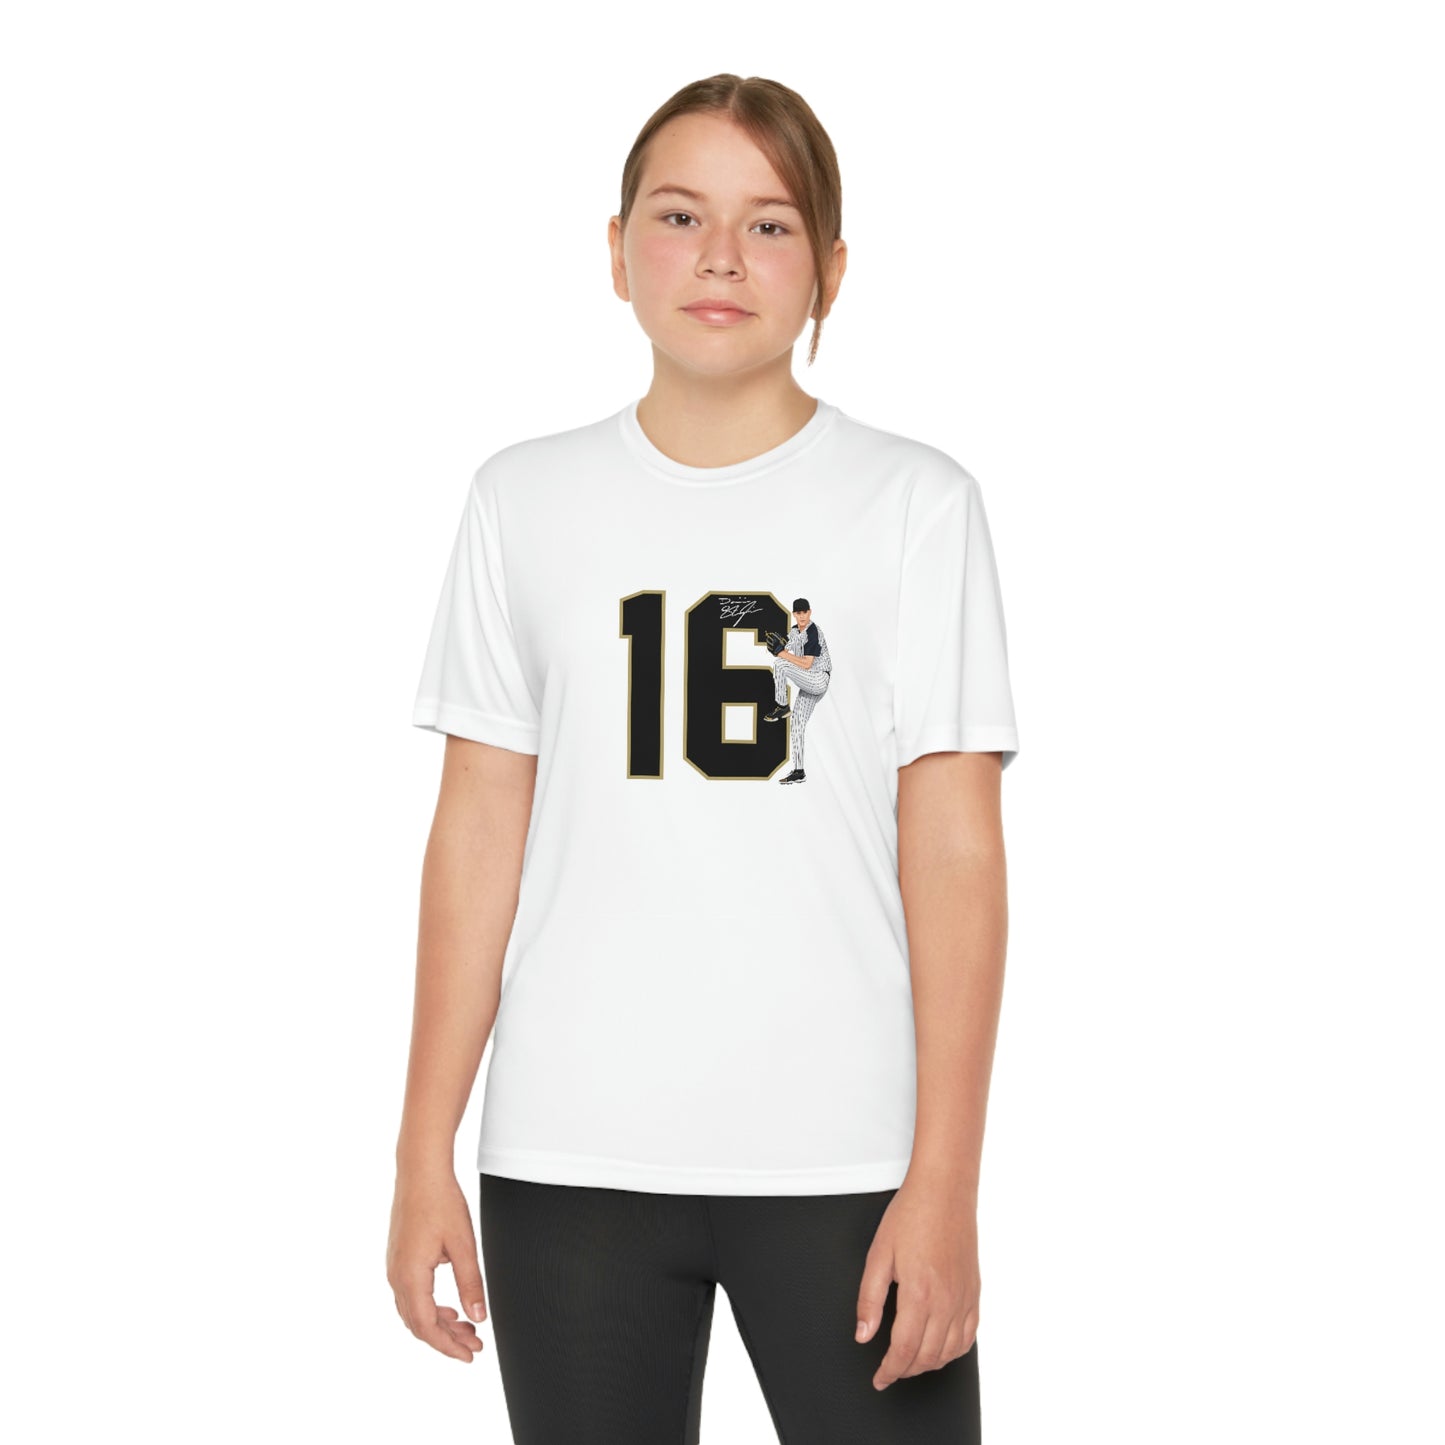 Dominic Stagliano YOUTH Performance Shirt